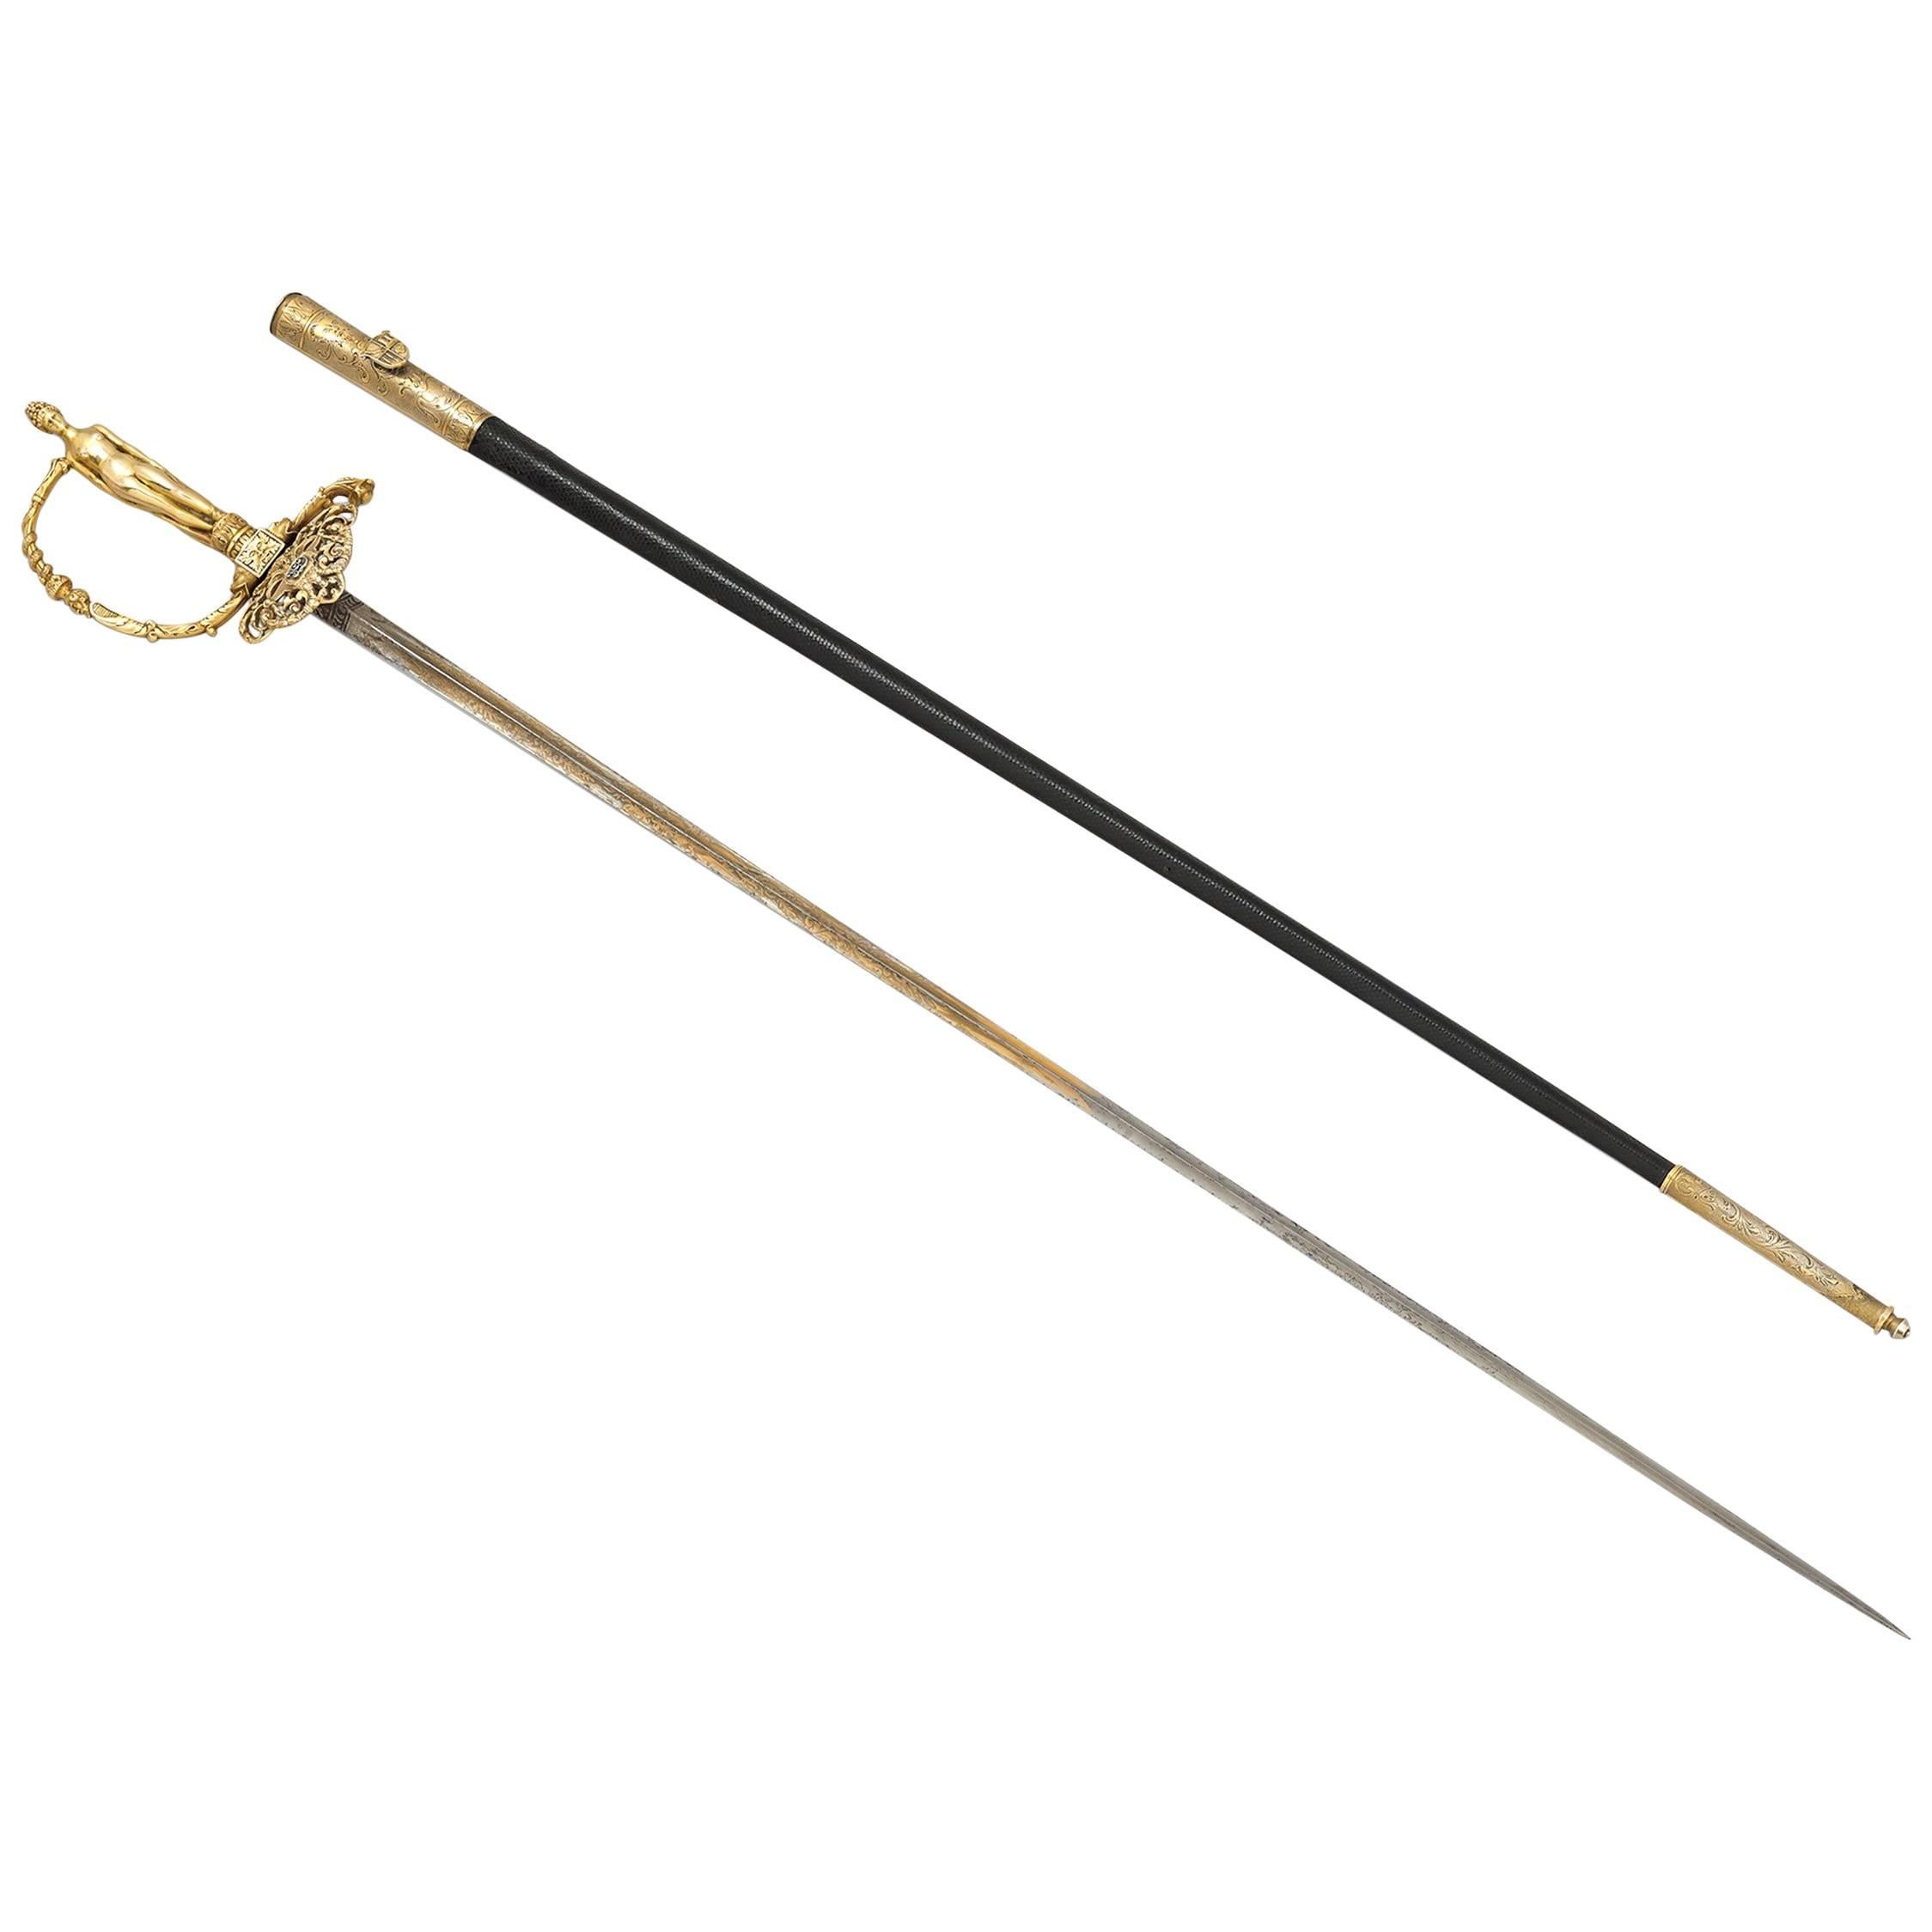 Jean-Gabriel Domergue's French Academician Sword For Sale